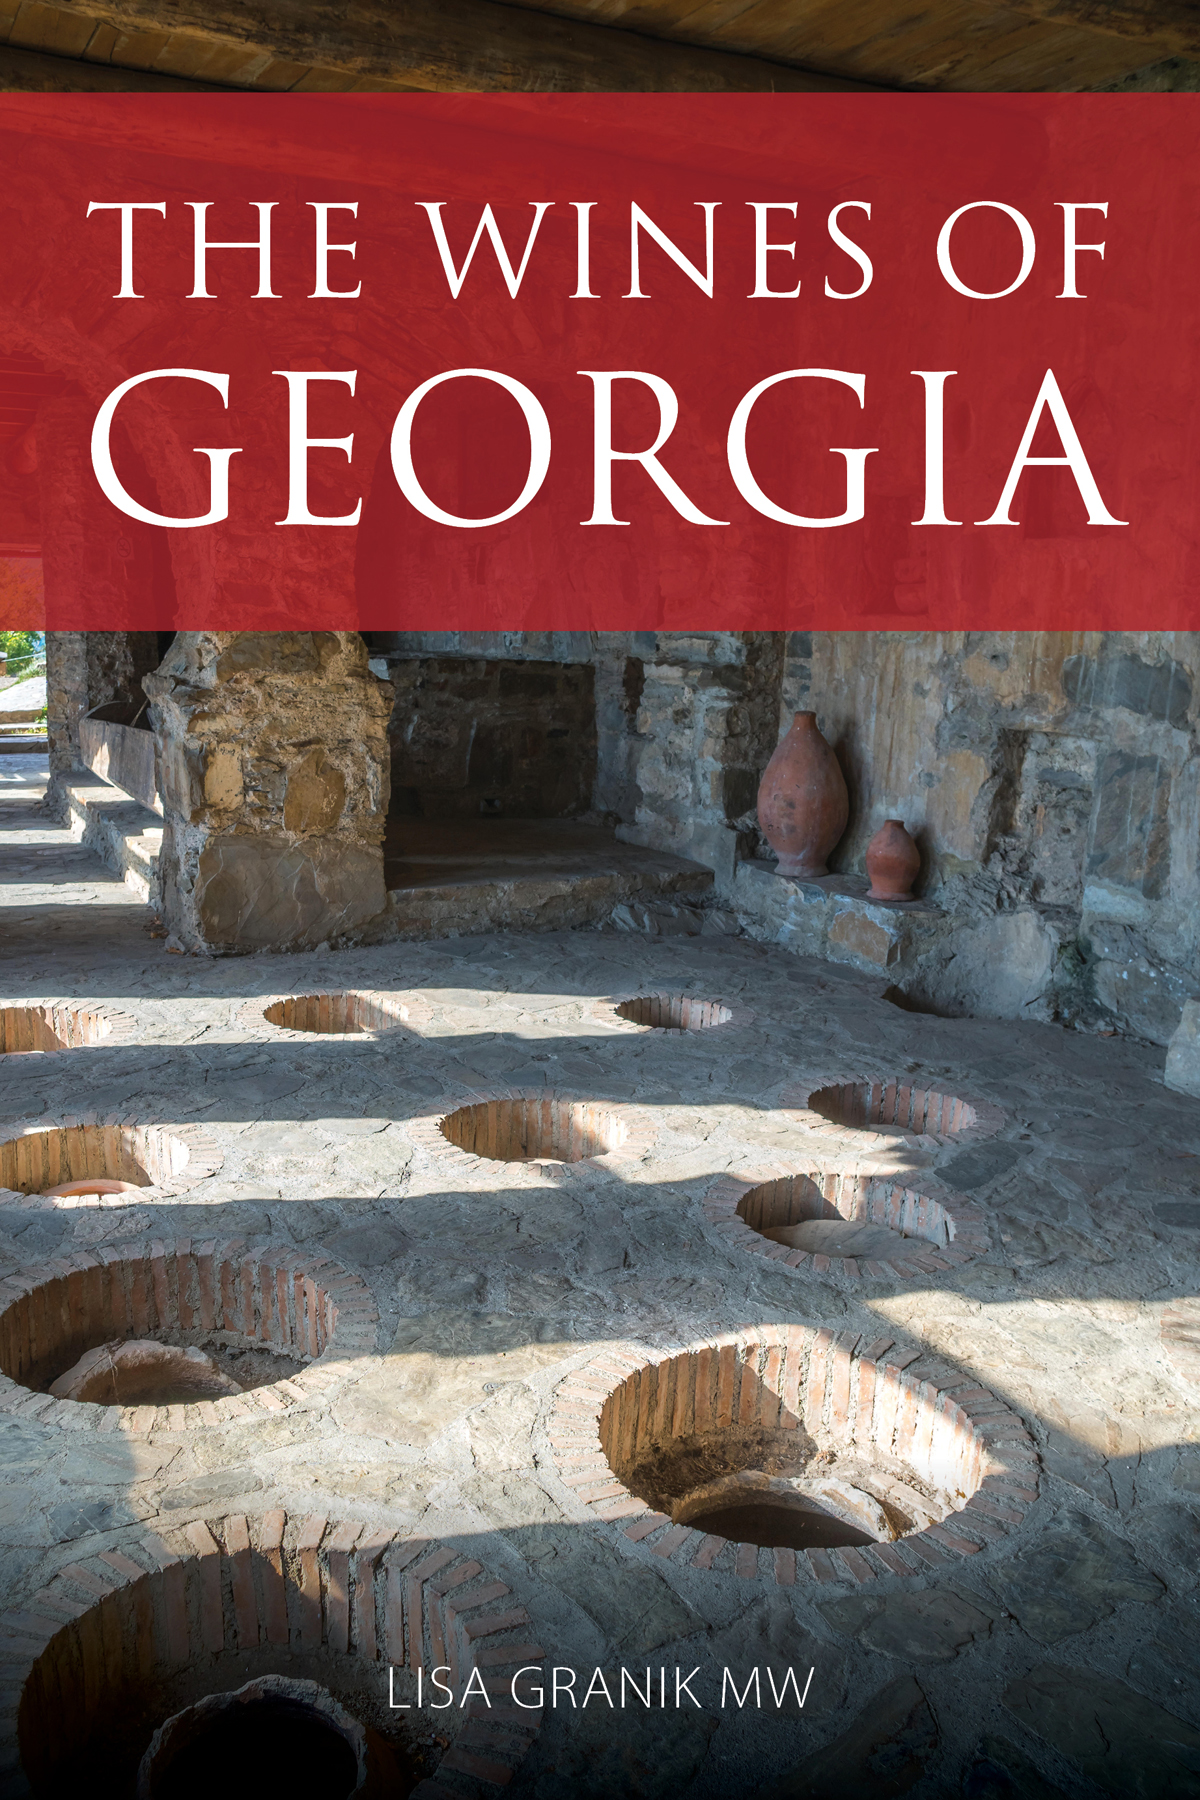 Extract: The wines of Georgia by Lisa Granik MW